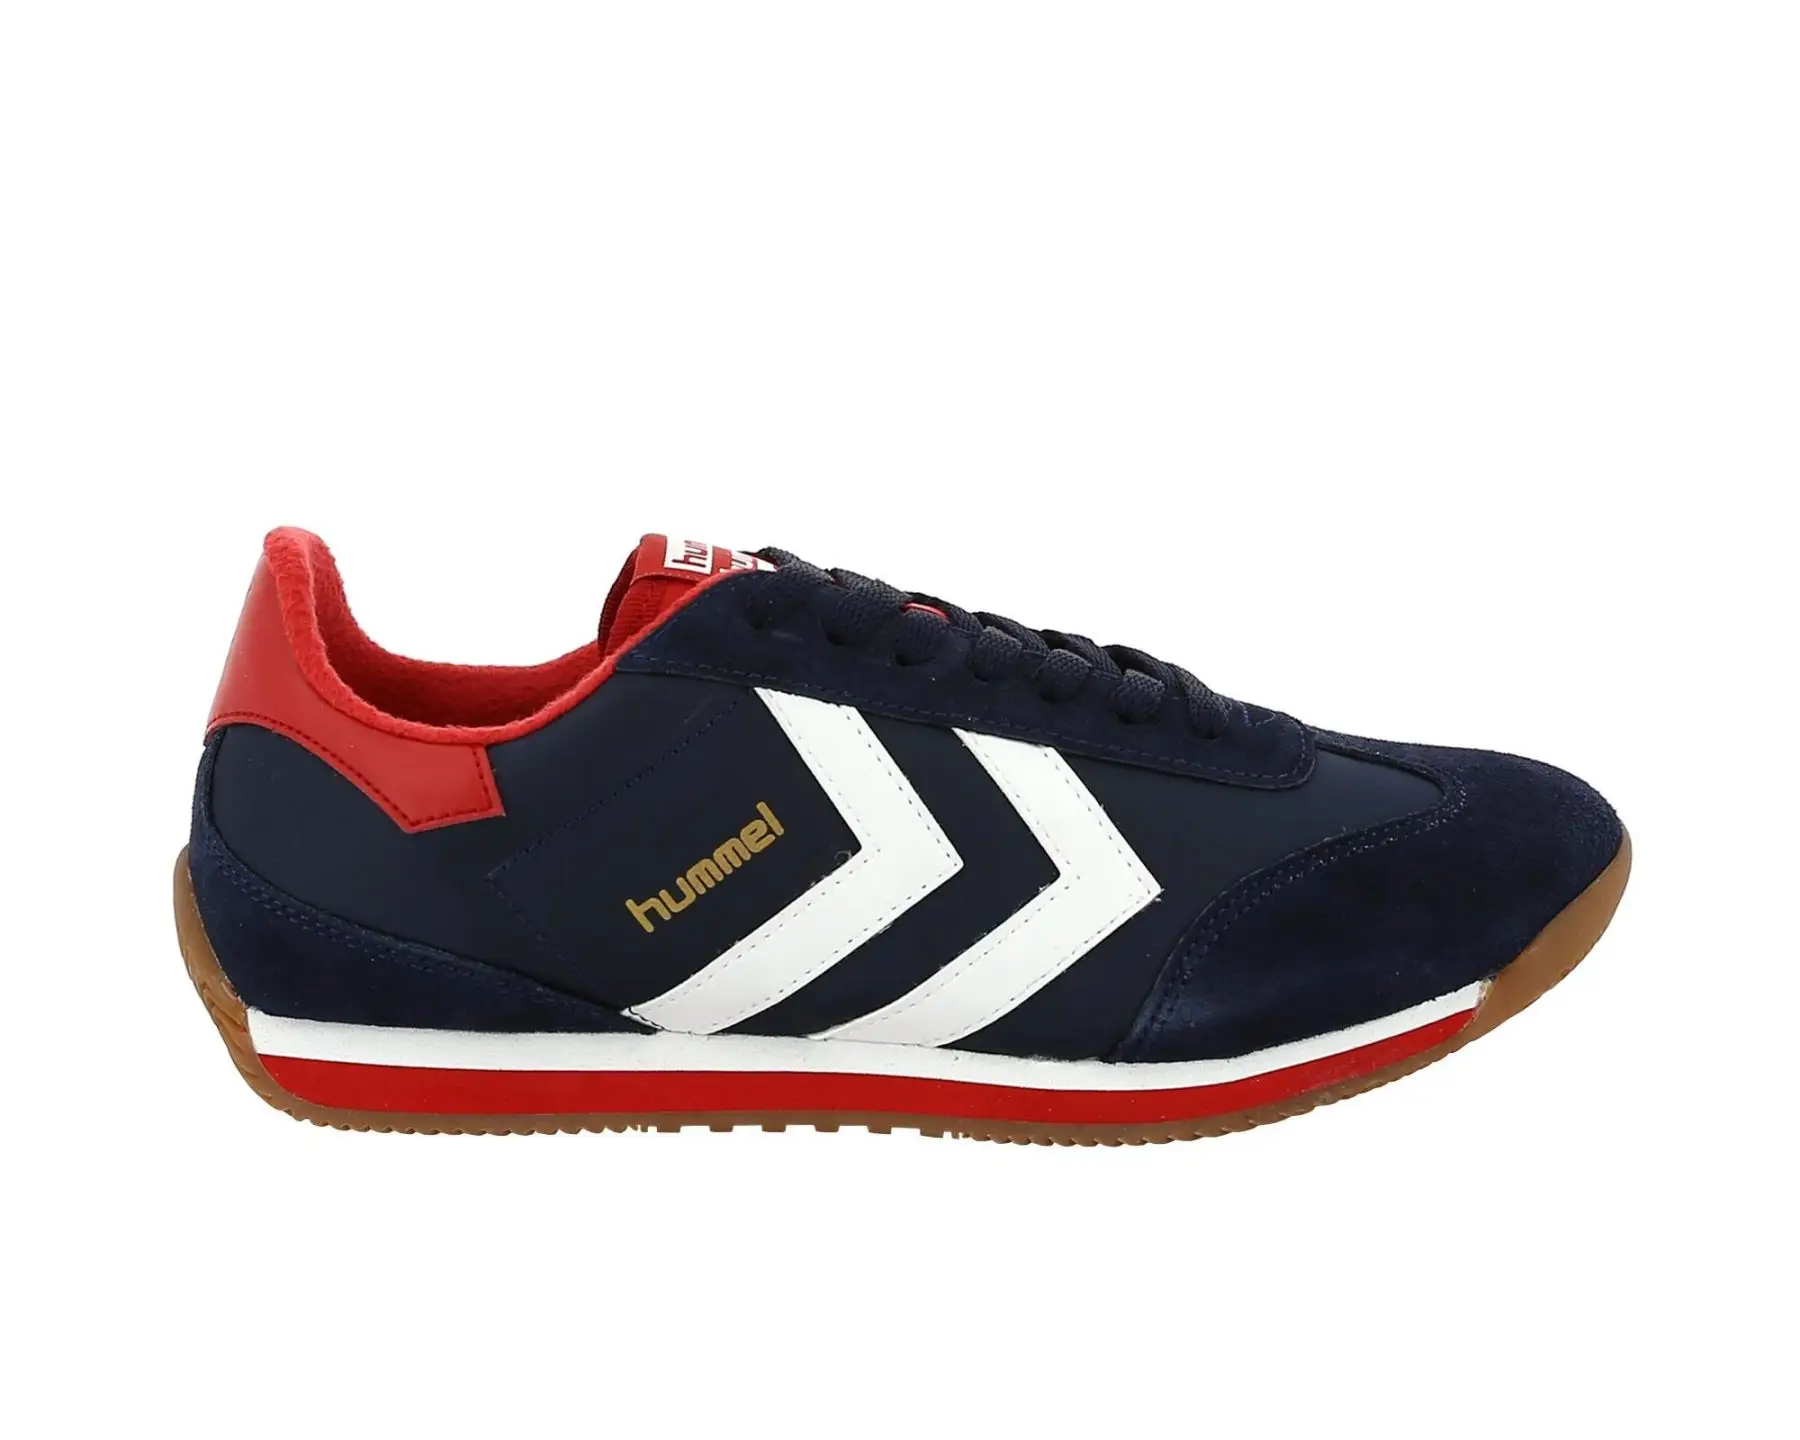 Hummel Original Unisex Sneakers Casual Sneakers Navy Blue Color Casual Walking Shoes Casual Men's and Women's Sneakers